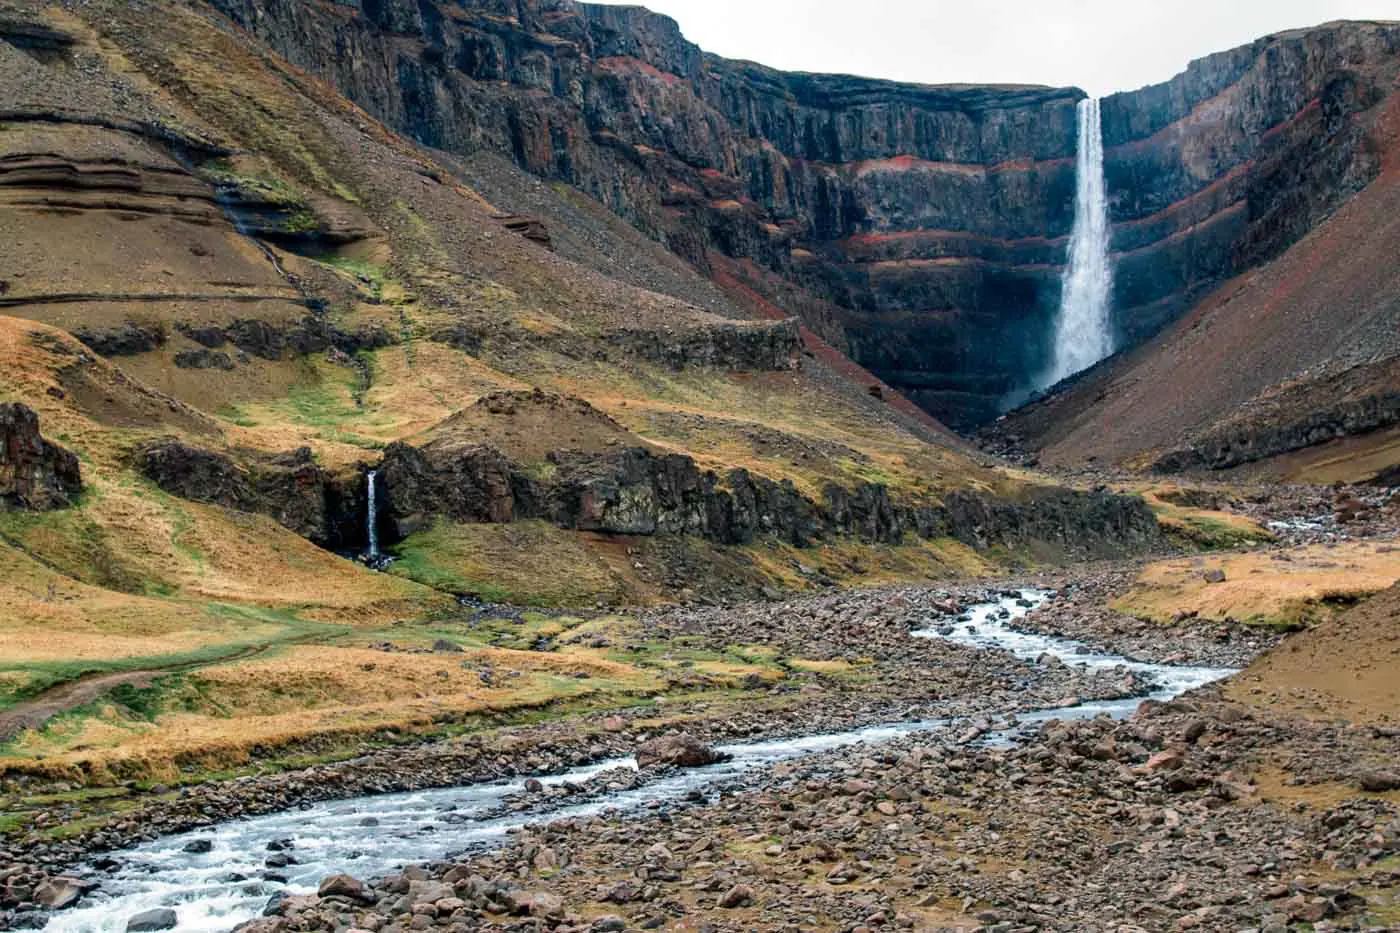 River flowing through a valley in front of the Hengifoss waterfall